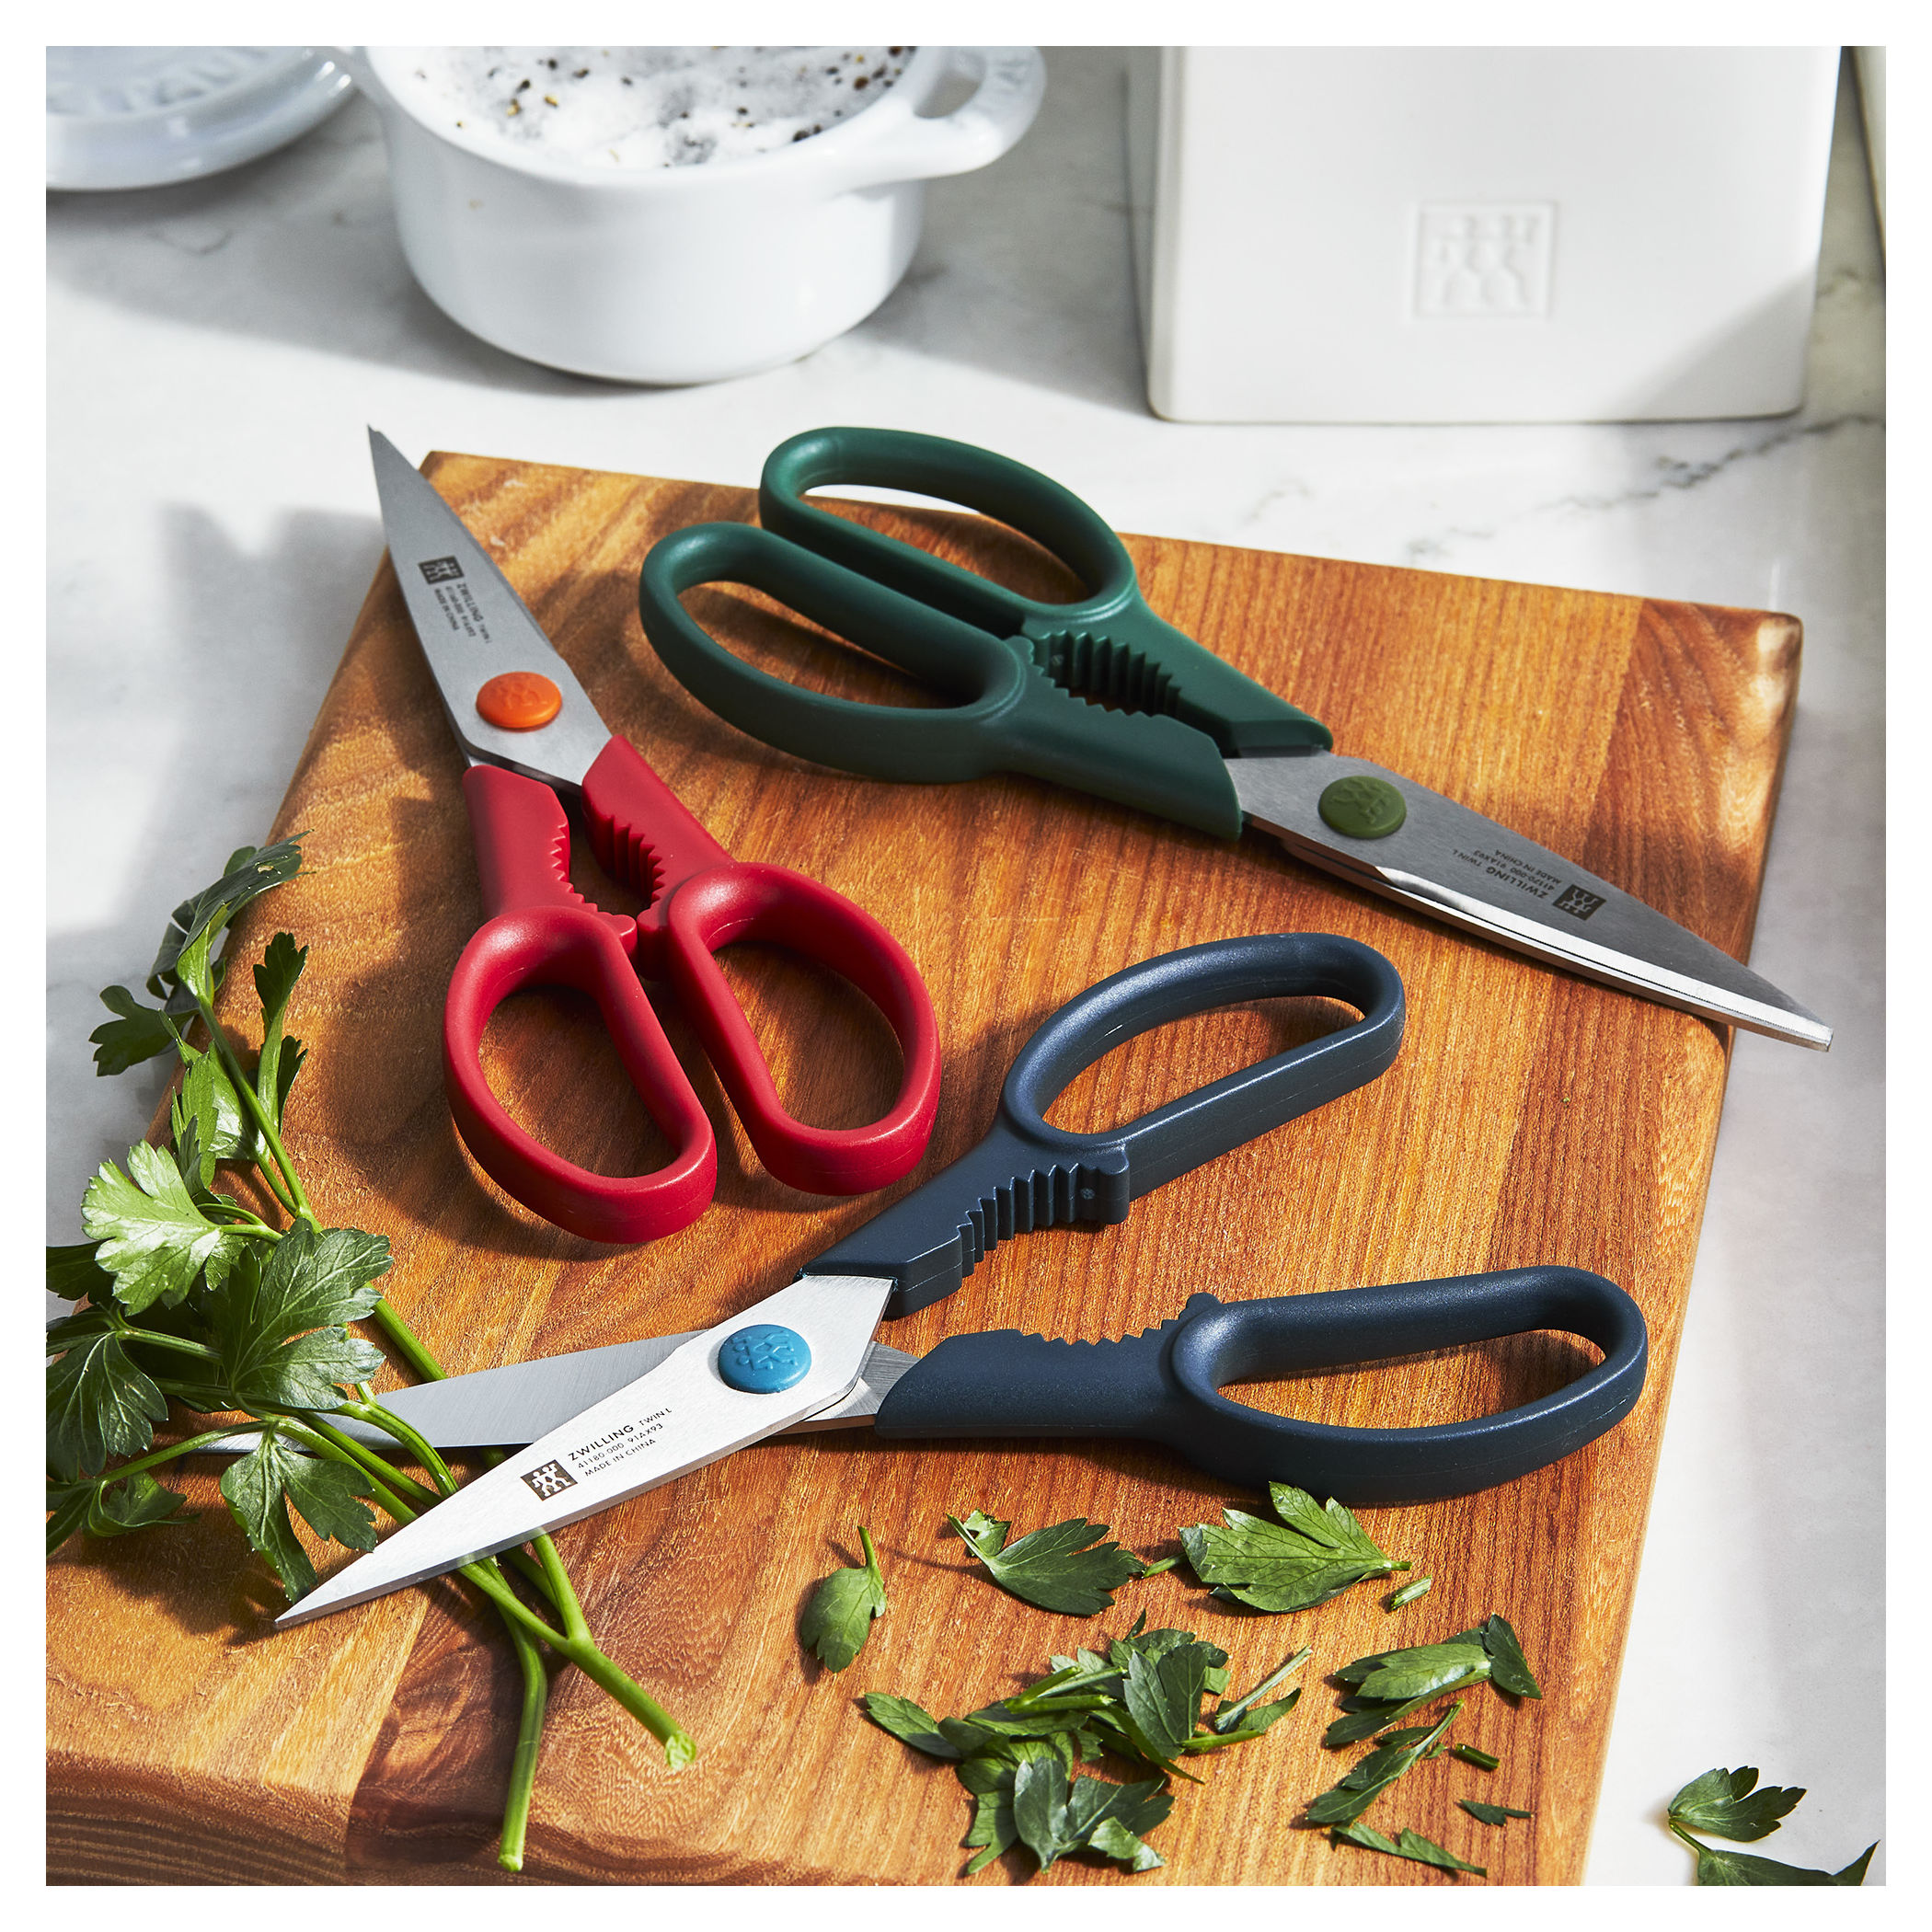 https://www.zwilling.com/on/demandware.static/-/Sites-zwilling-master-catalog/default/dw5ca0421a/images/large/750031422.jpg